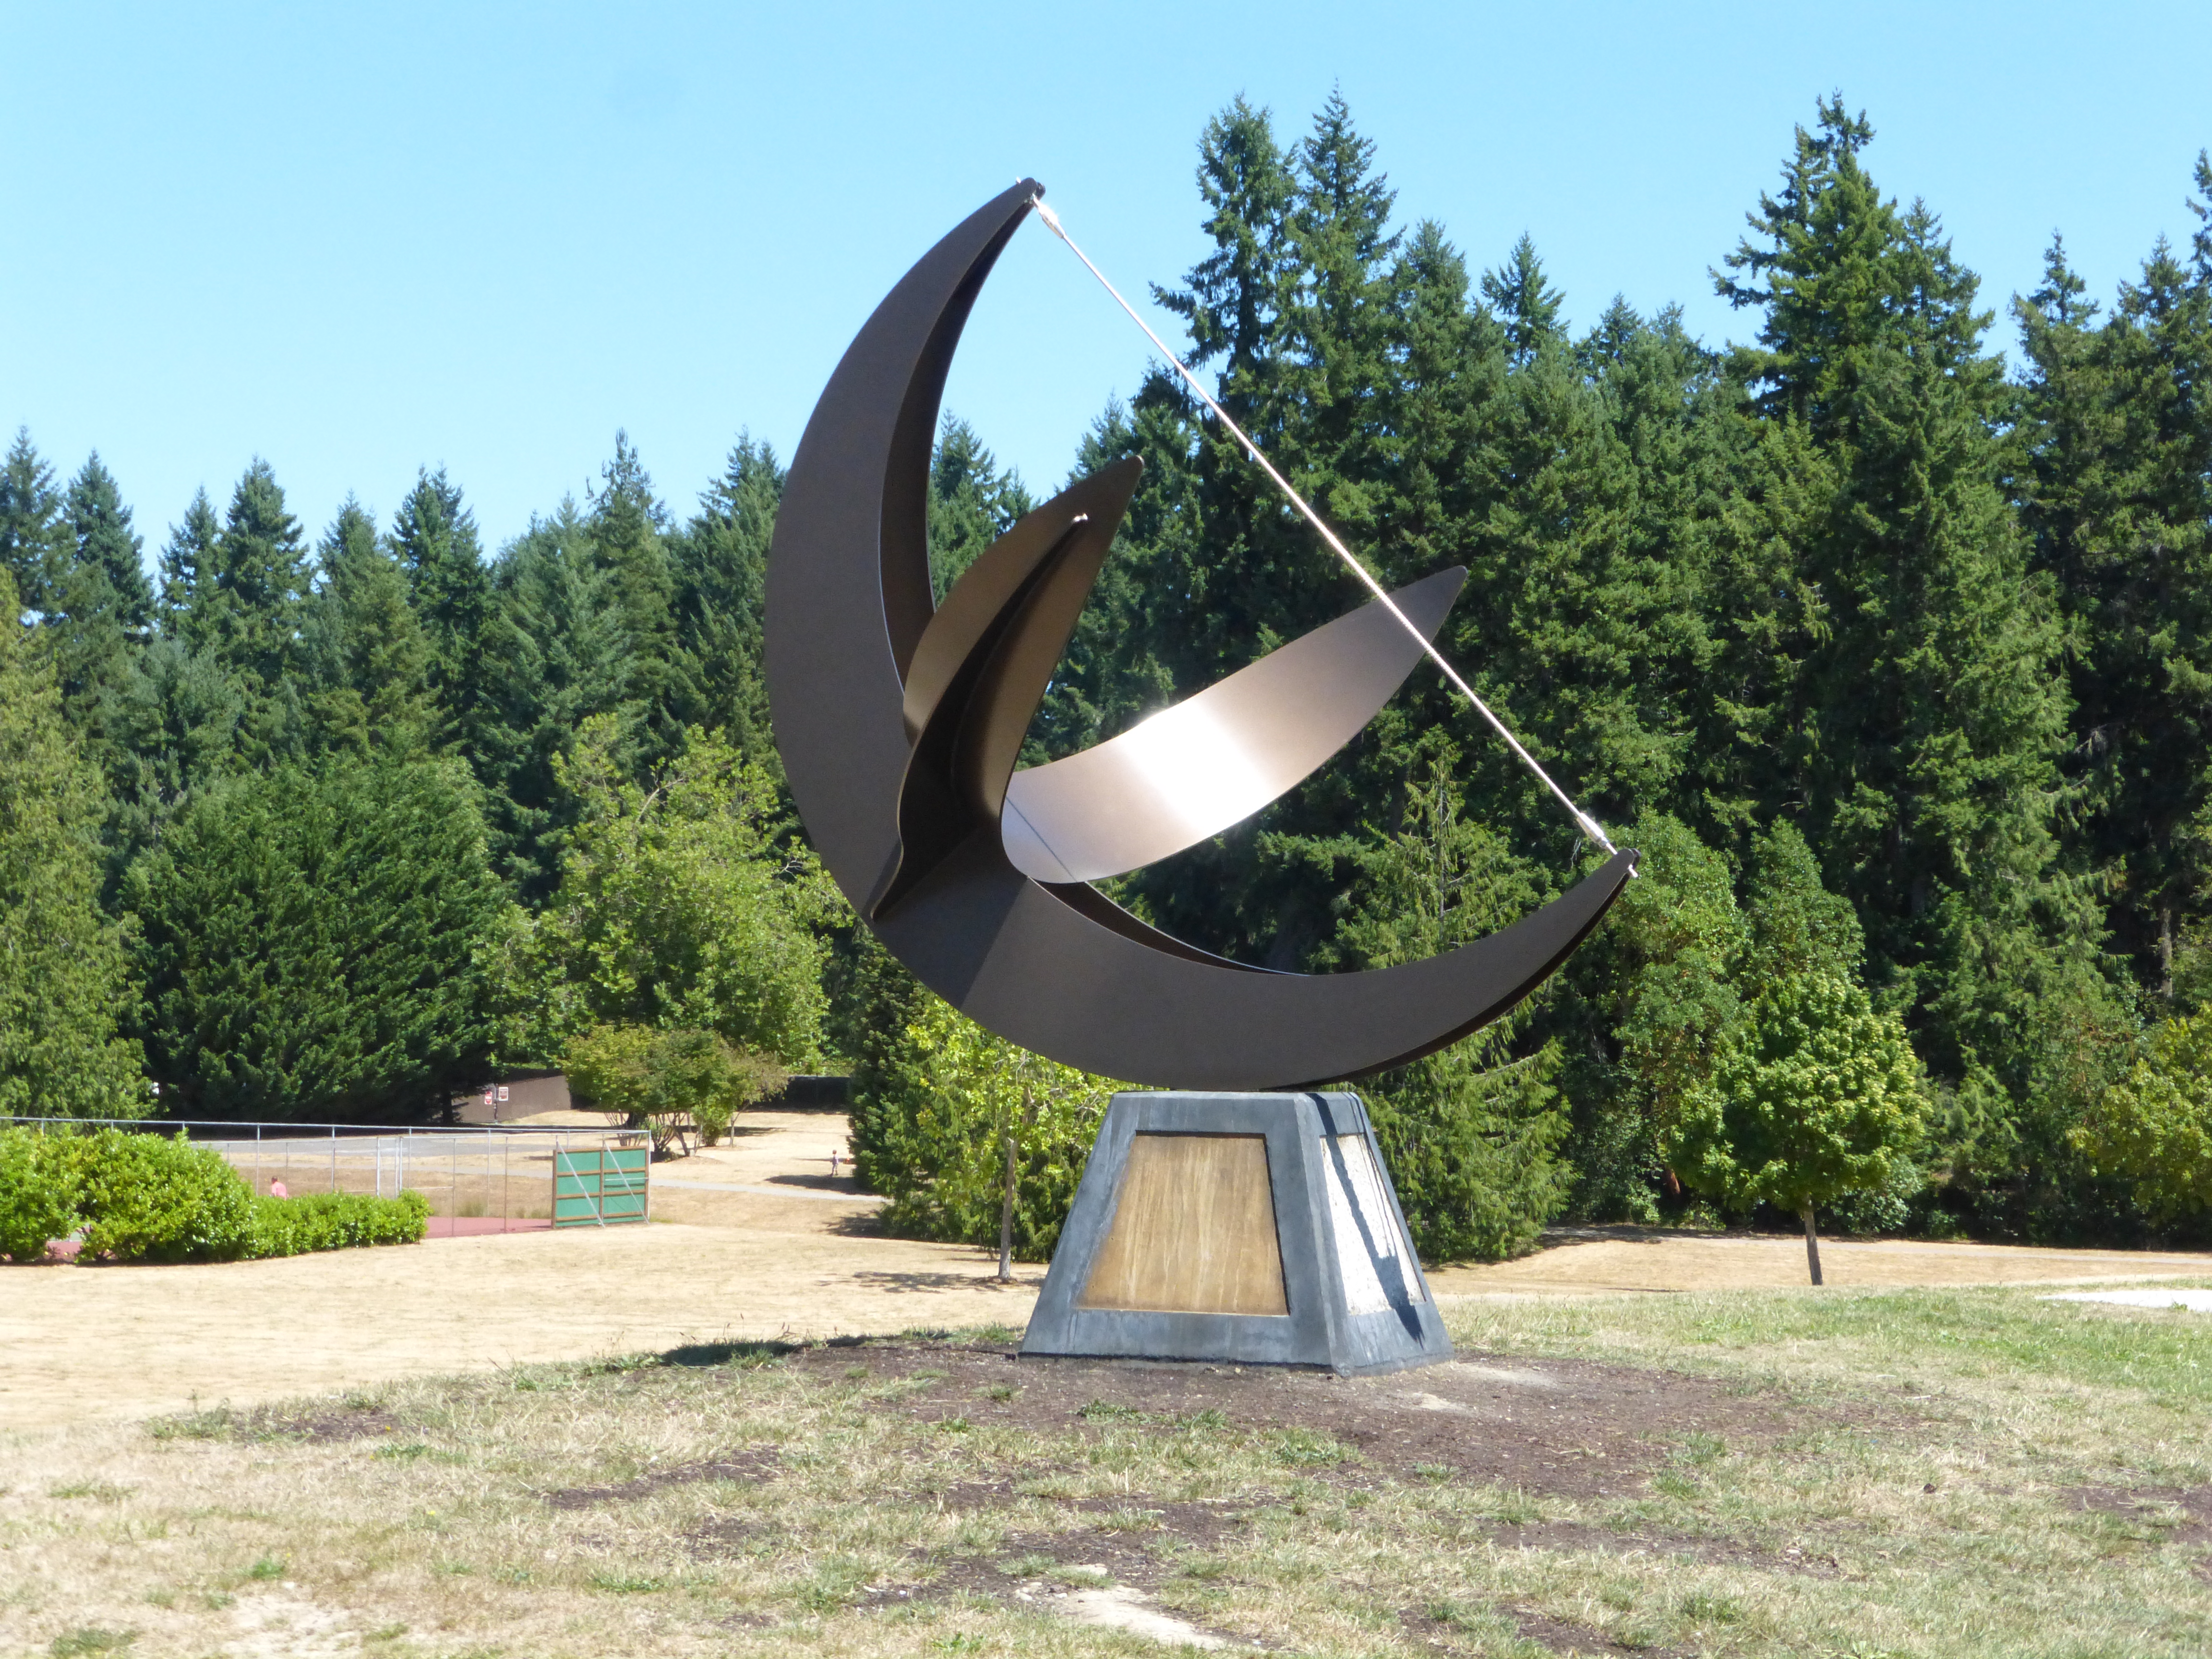 <i>Podcast: What’s Up Bainbridge:</i> <br>Learn about sundials at the planetarium on Jan 9th